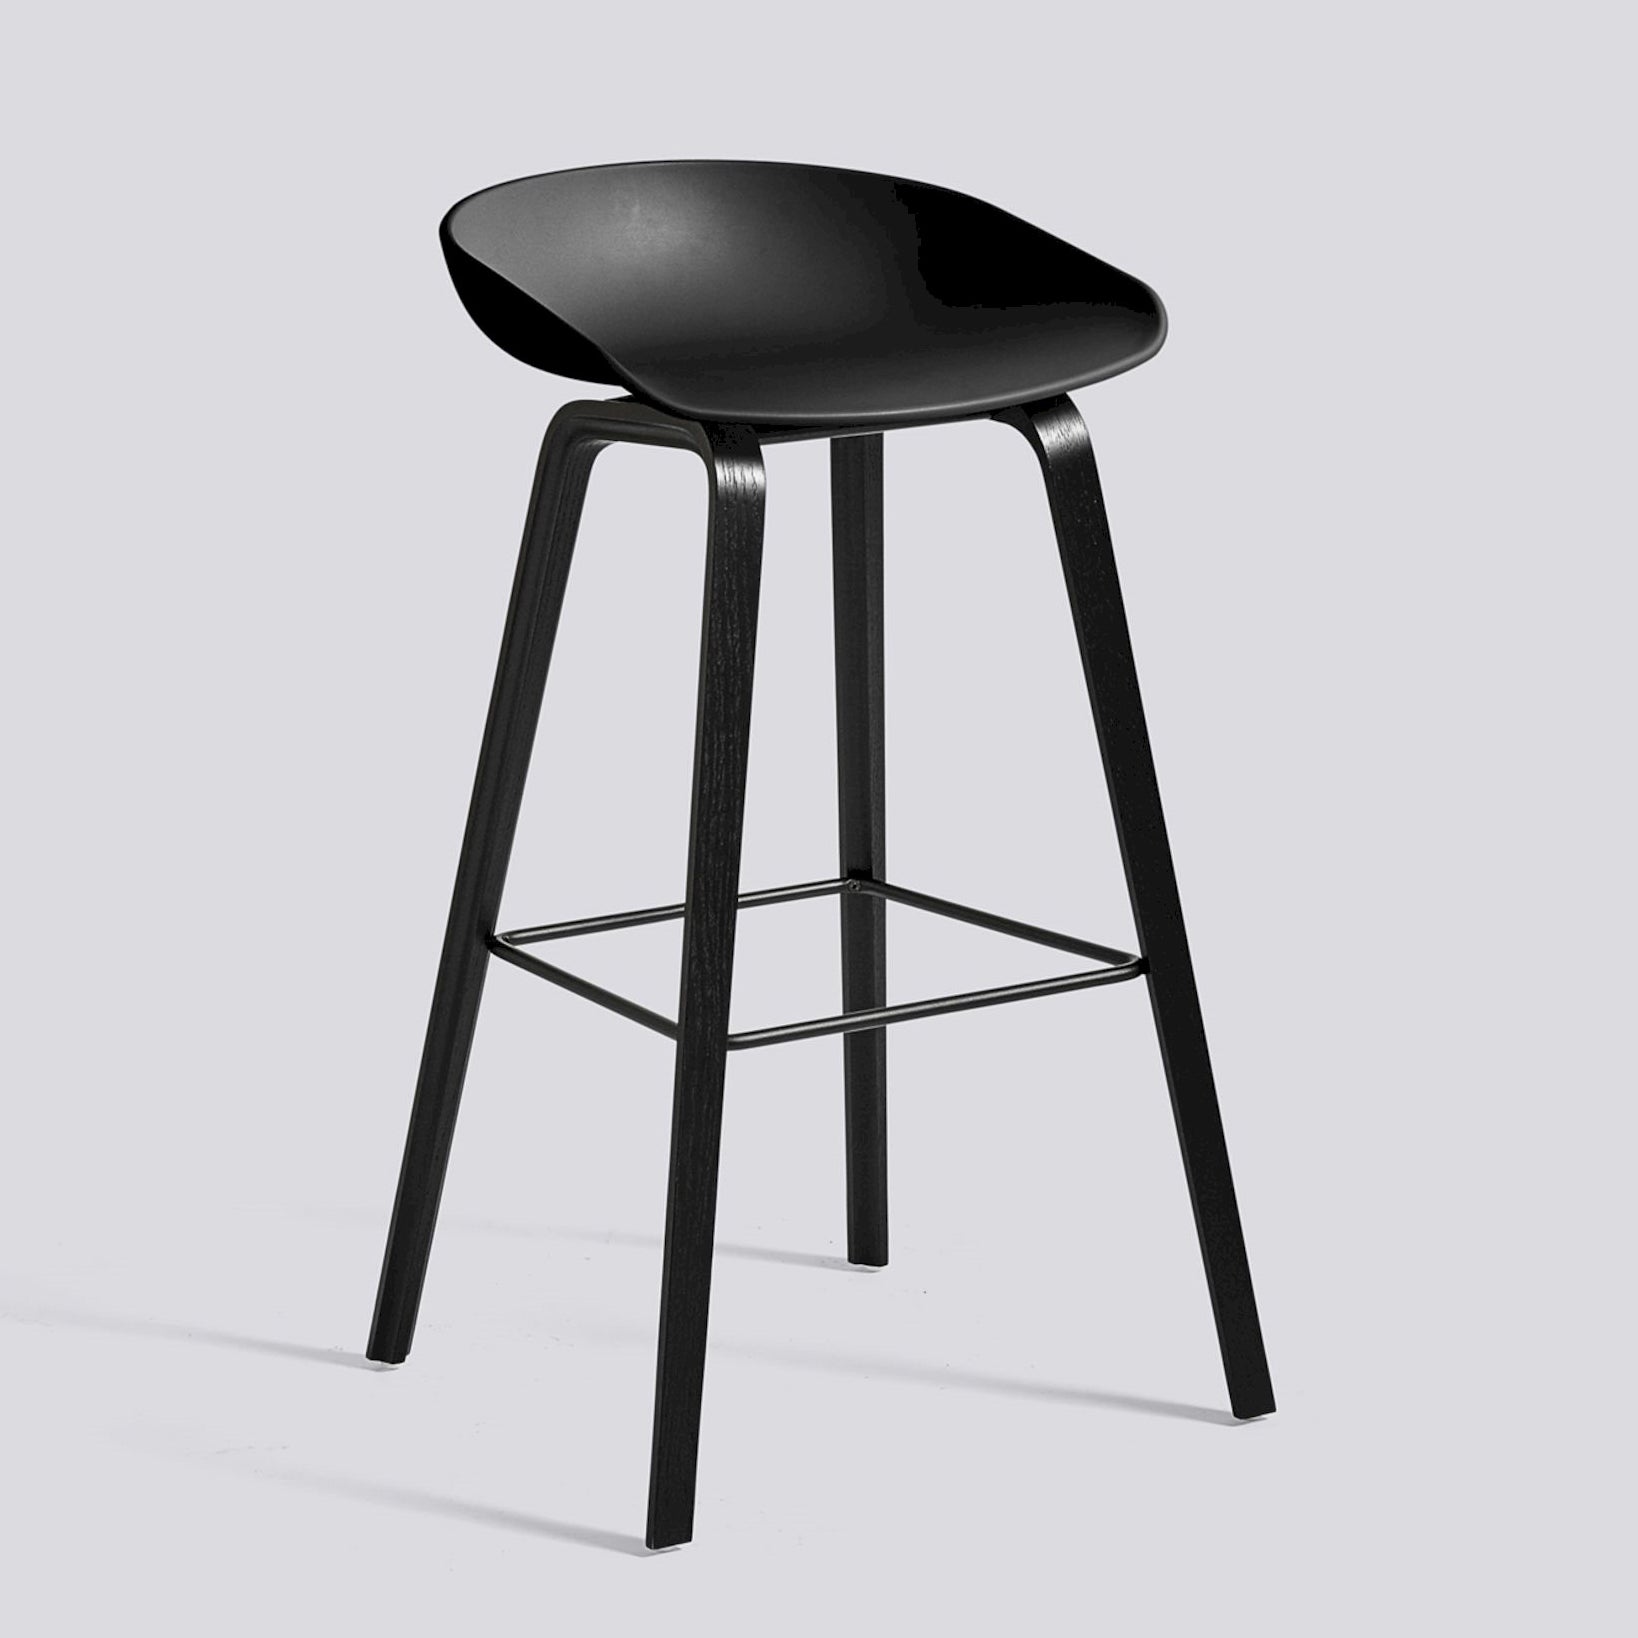 About A Stool AAS32 Bar